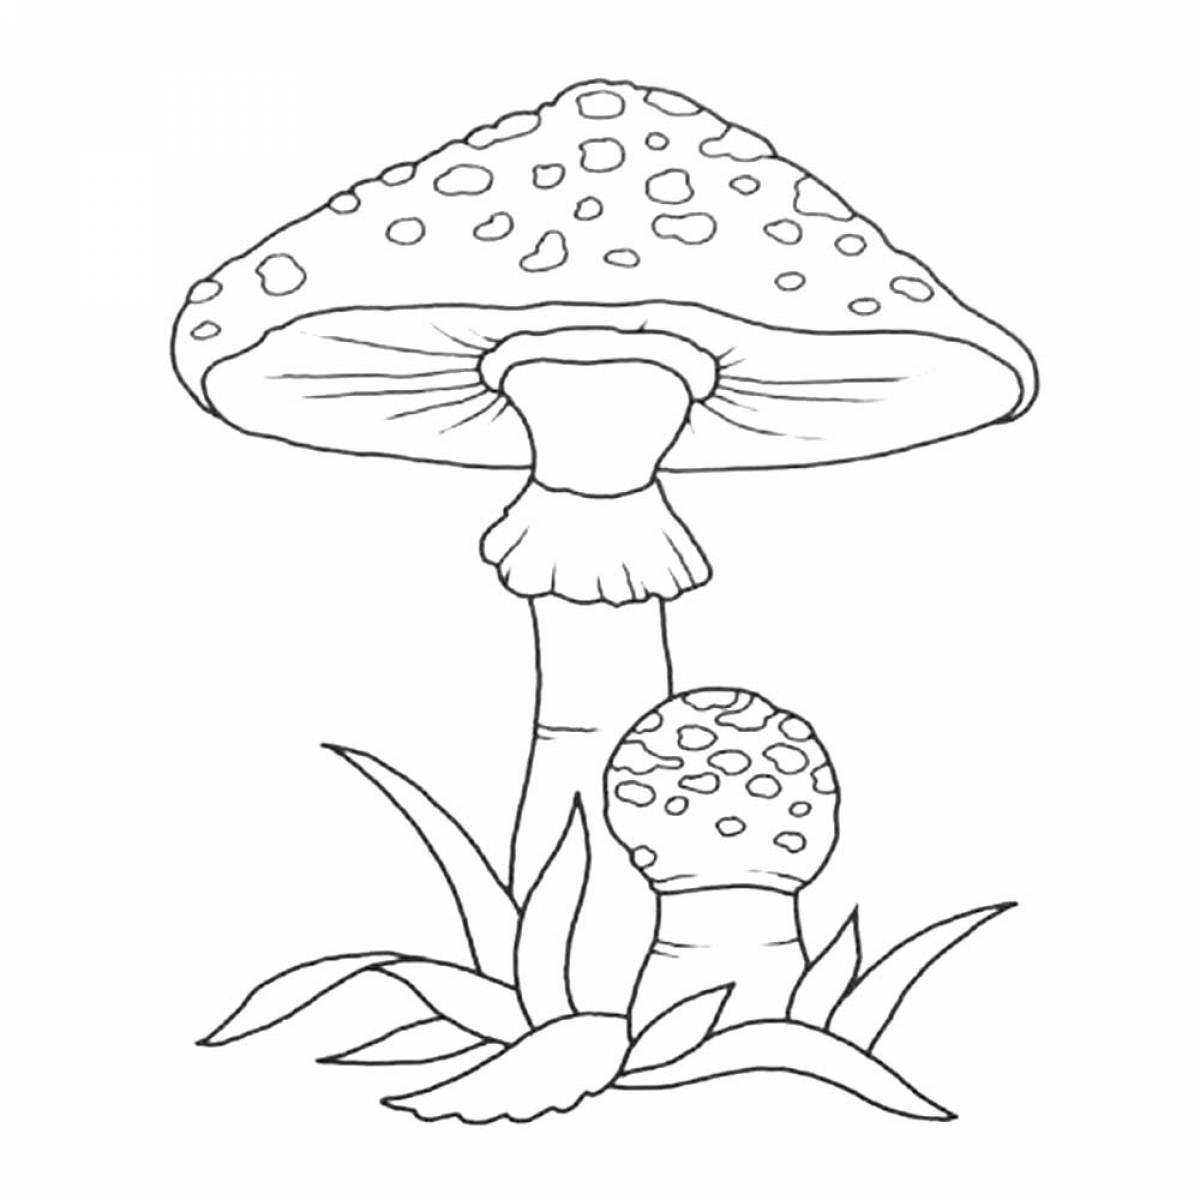 Fly agaric coloring page